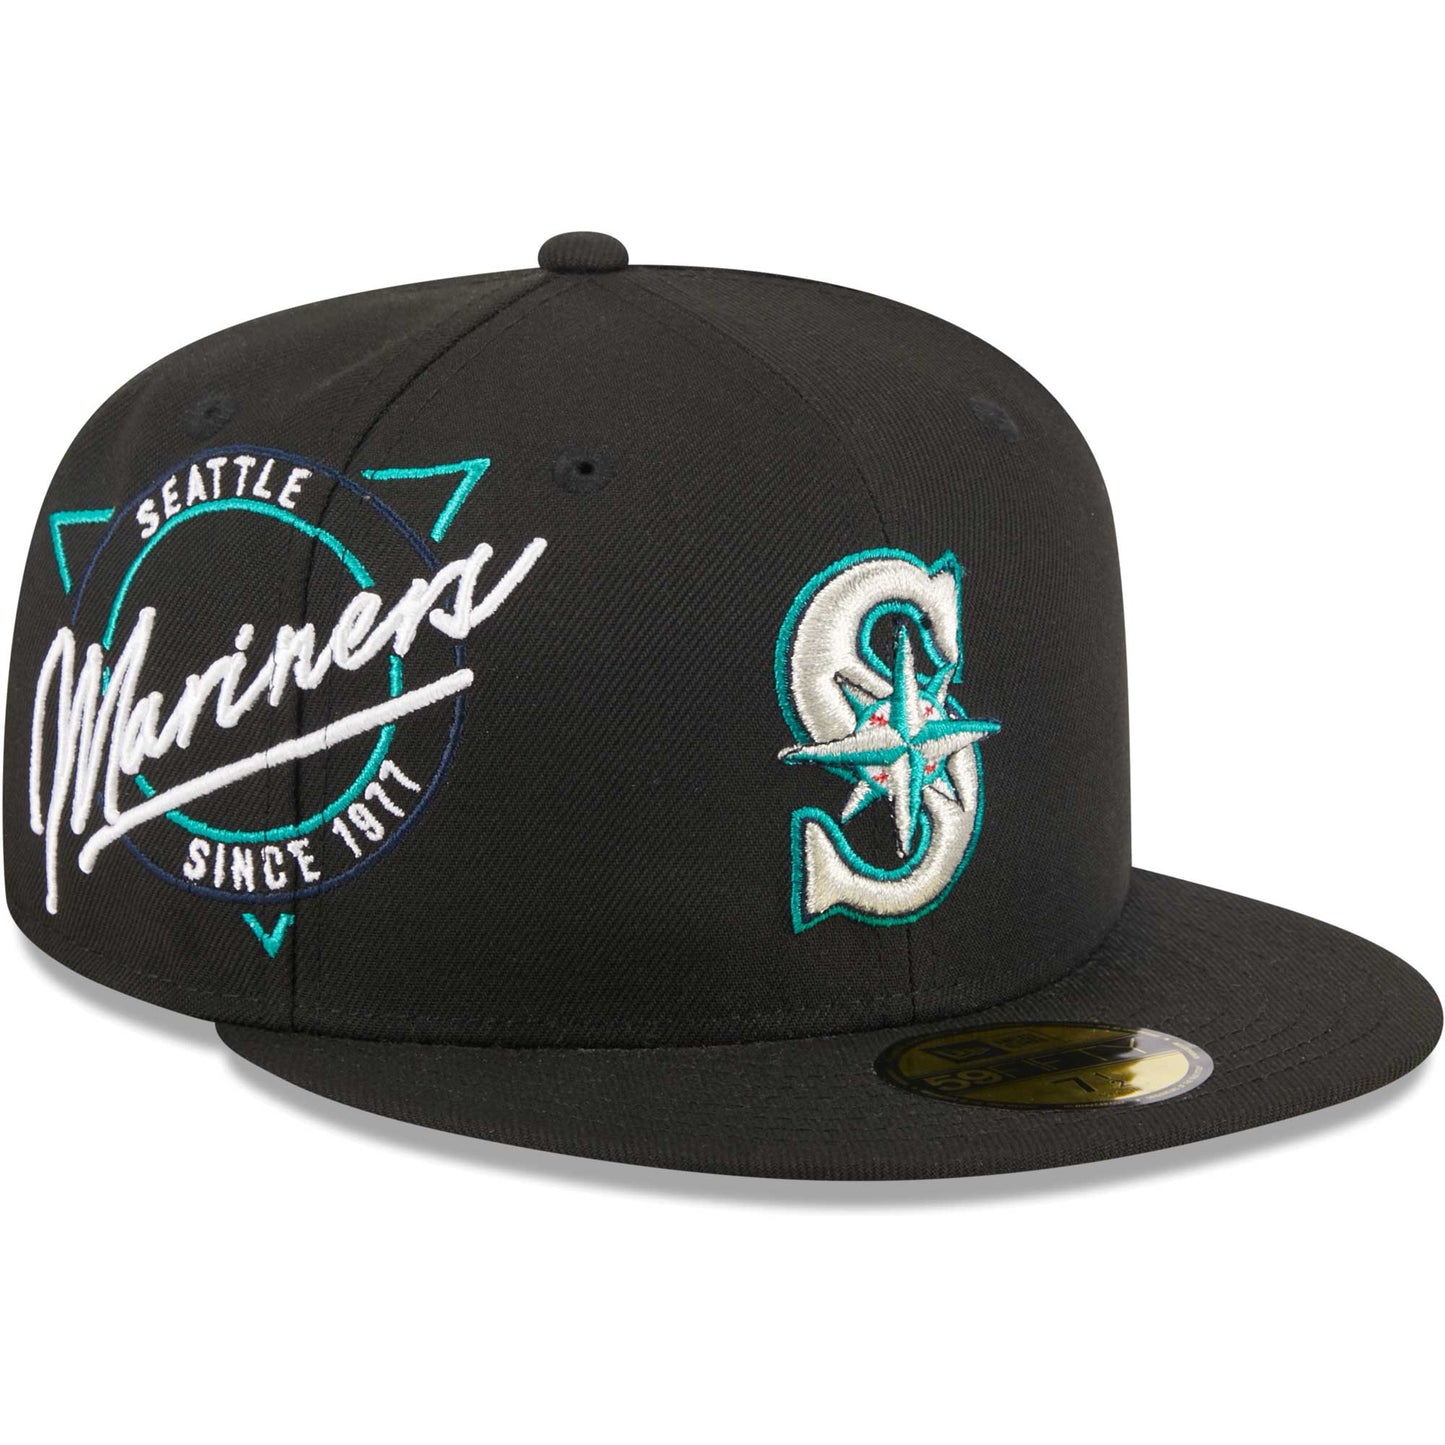 Seattle Mariners New Era Neon 59FIFTY Fitted Hat - Black